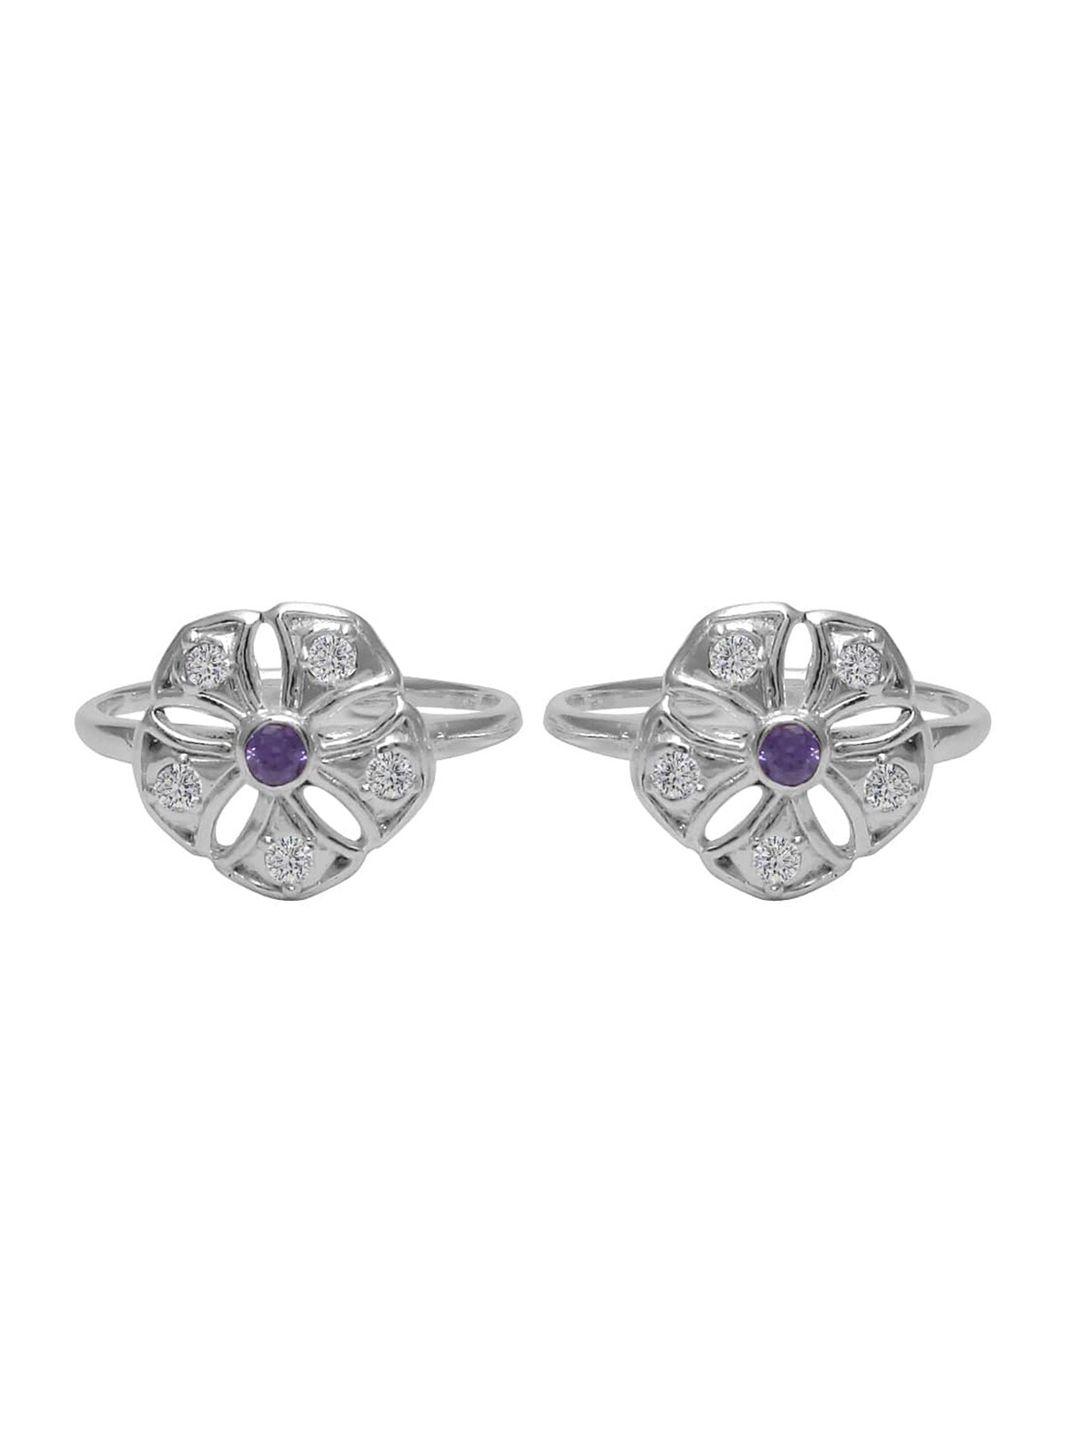 abhooshan-set-of-2-92.5-sterling-silver-cz-studded-adjustable-toe-rings